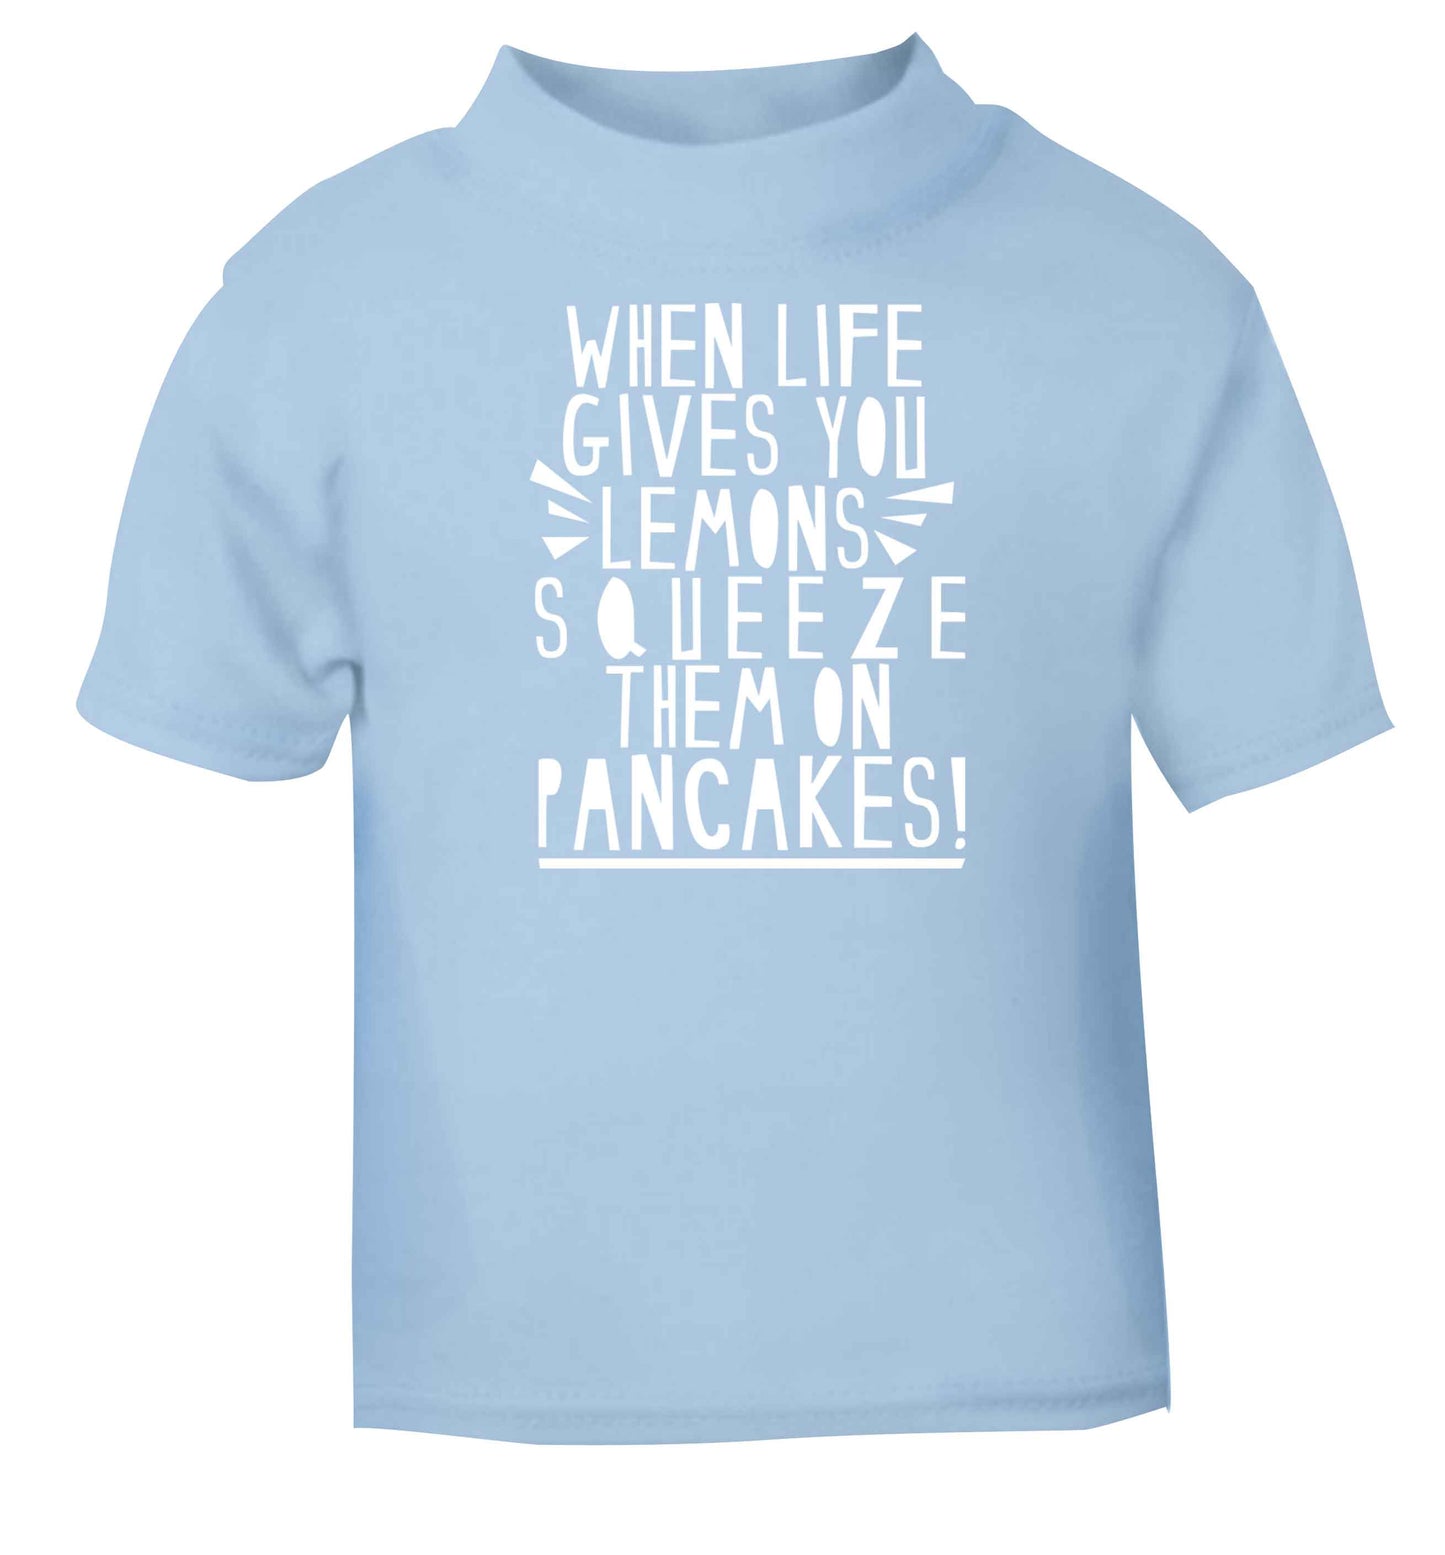 When life gives you lemons squeeze them on pancakes! light blue baby toddler Tshirt 2 Years